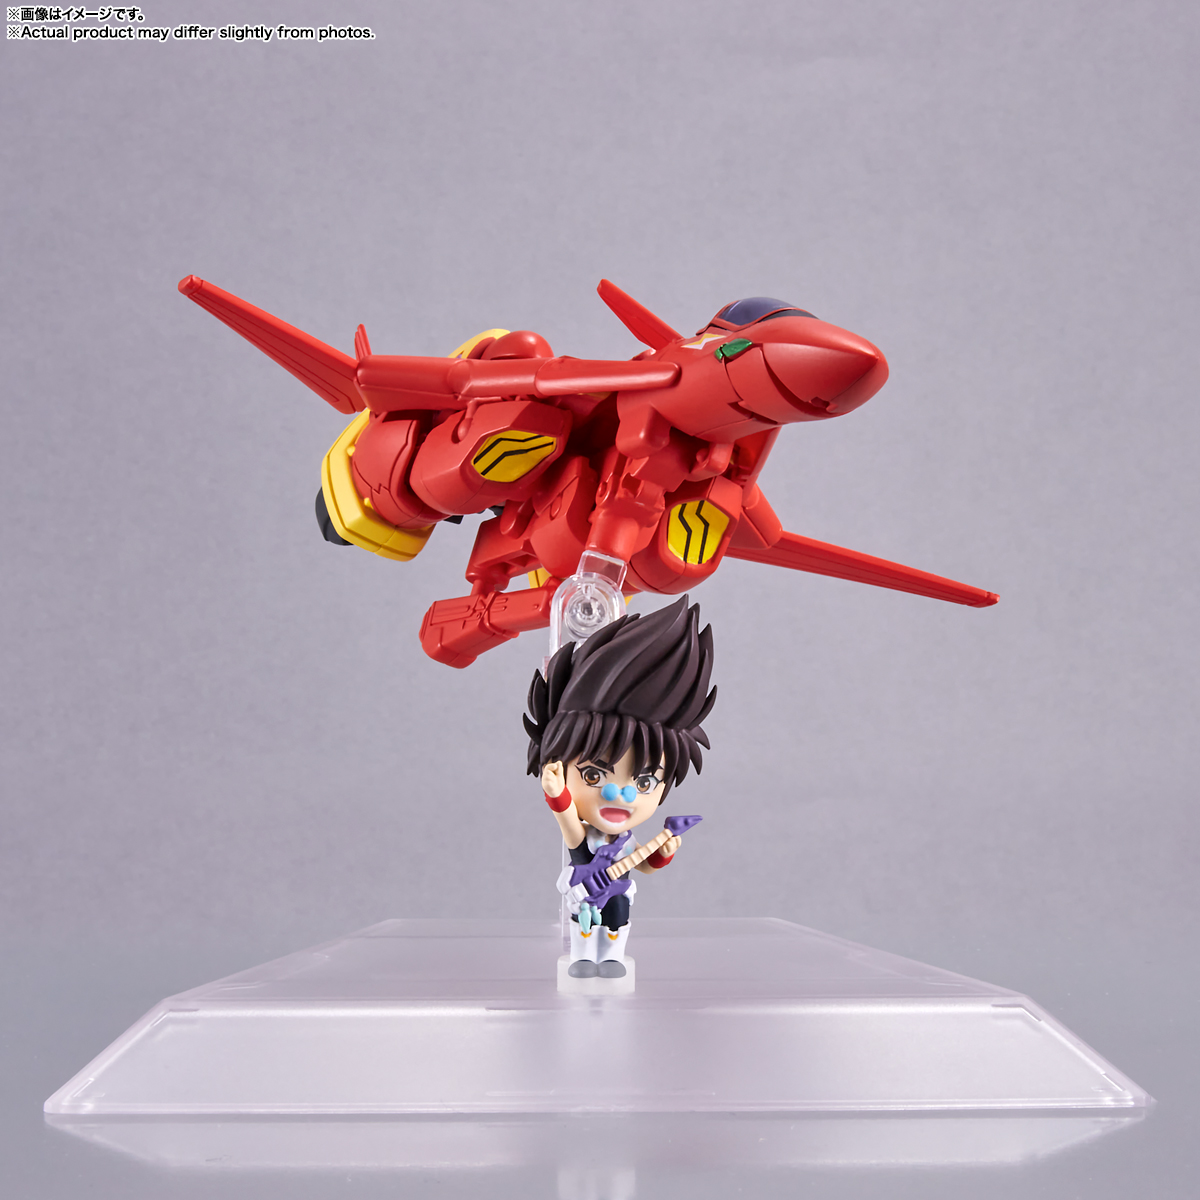 macross-7-vf-19-custom-fire-valkyrie-and-basara-nekki-tiny-session-action-figure-set image count 6